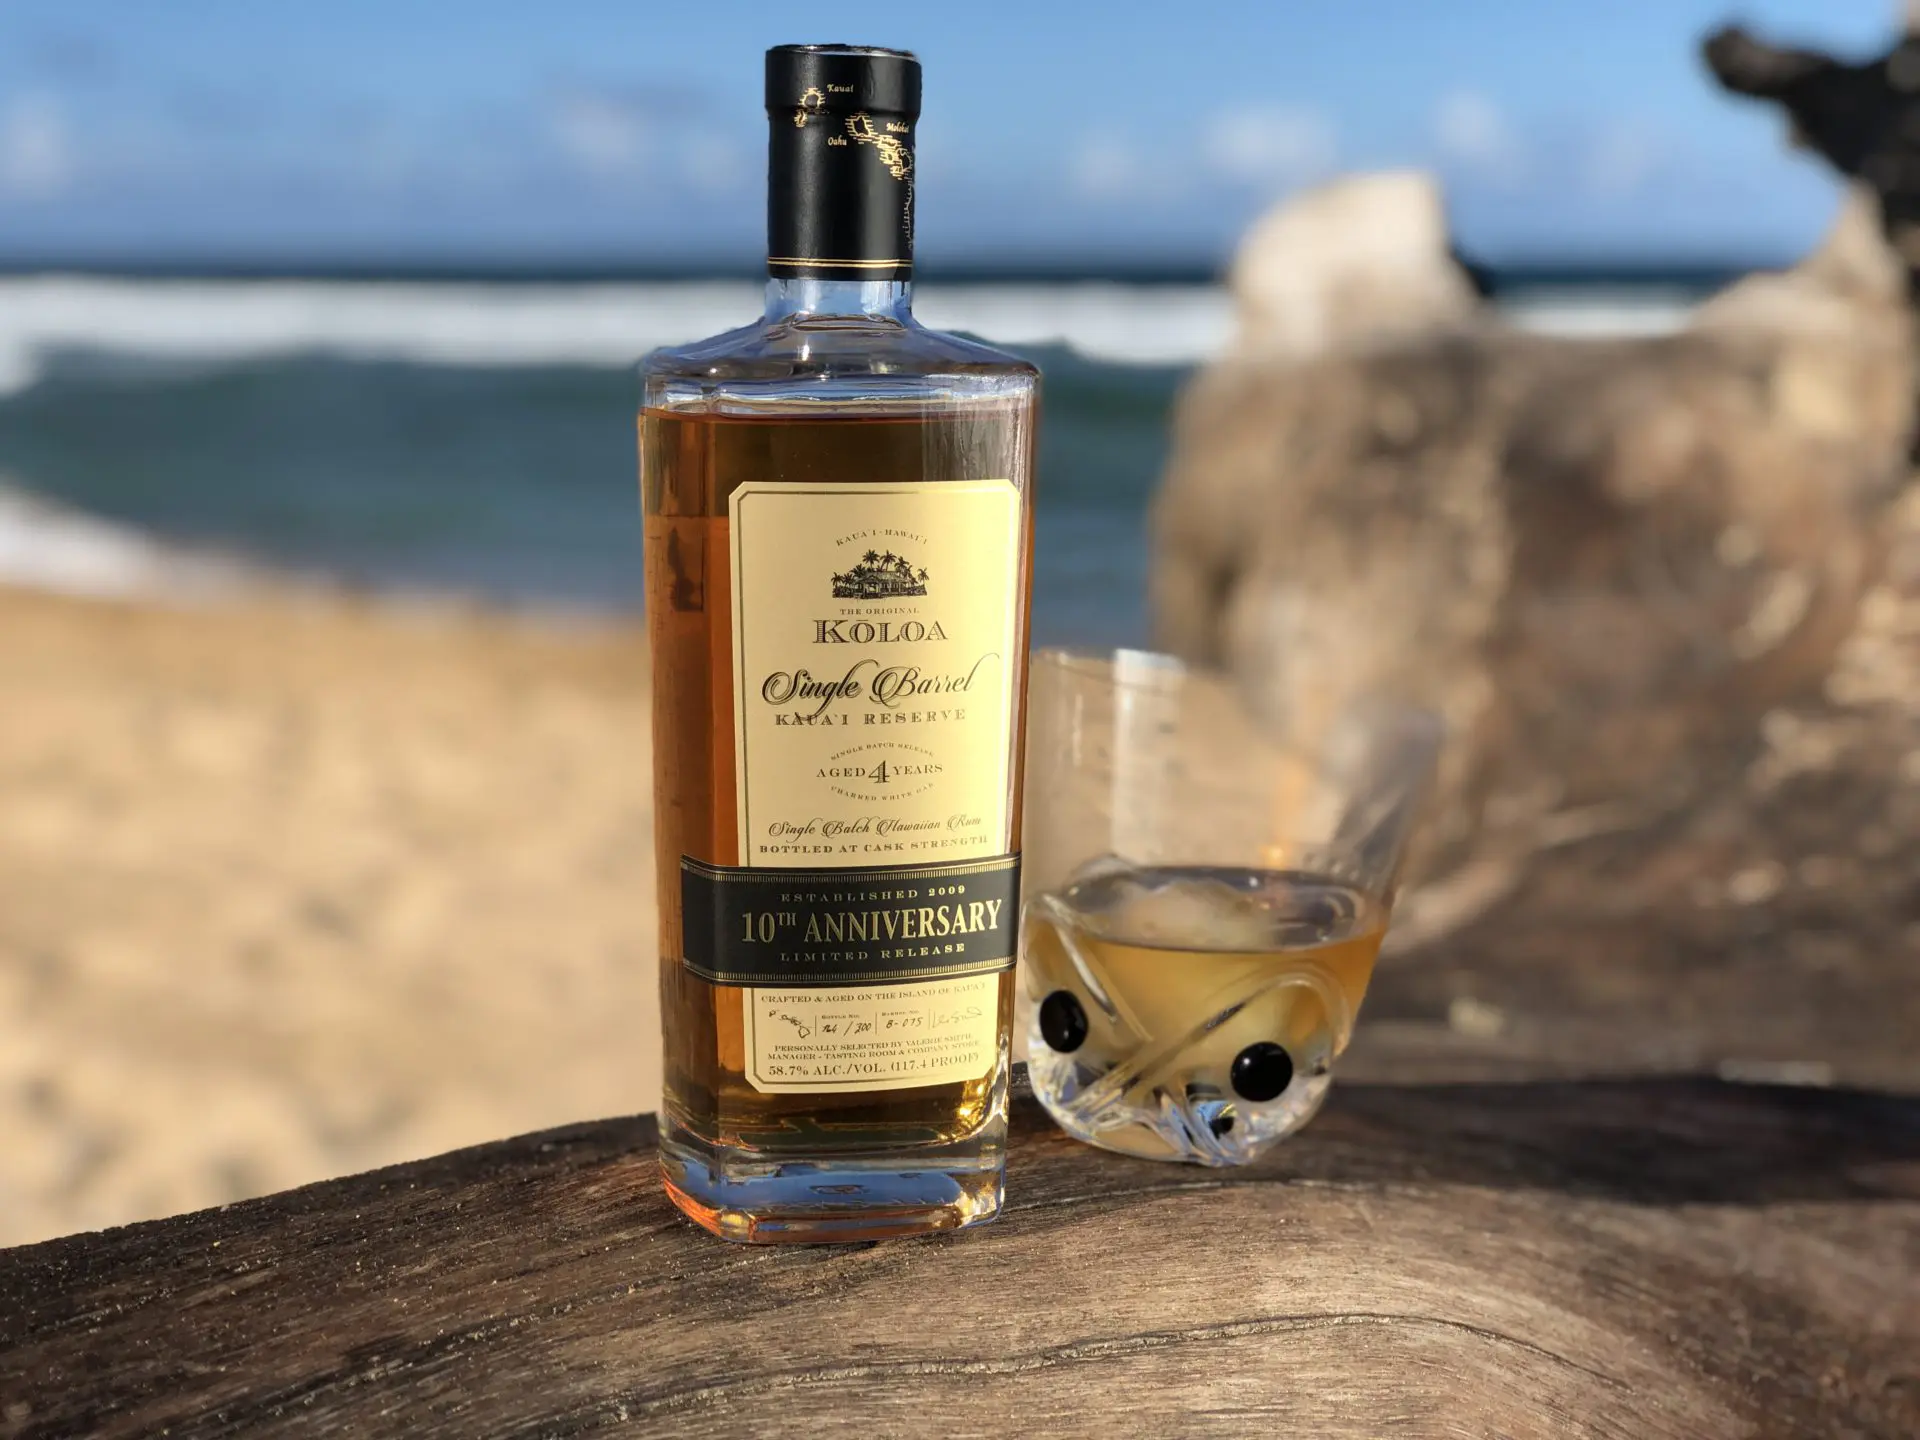 The rum has a very smooth taste with a hint of sweetness from the pure sugarcane.